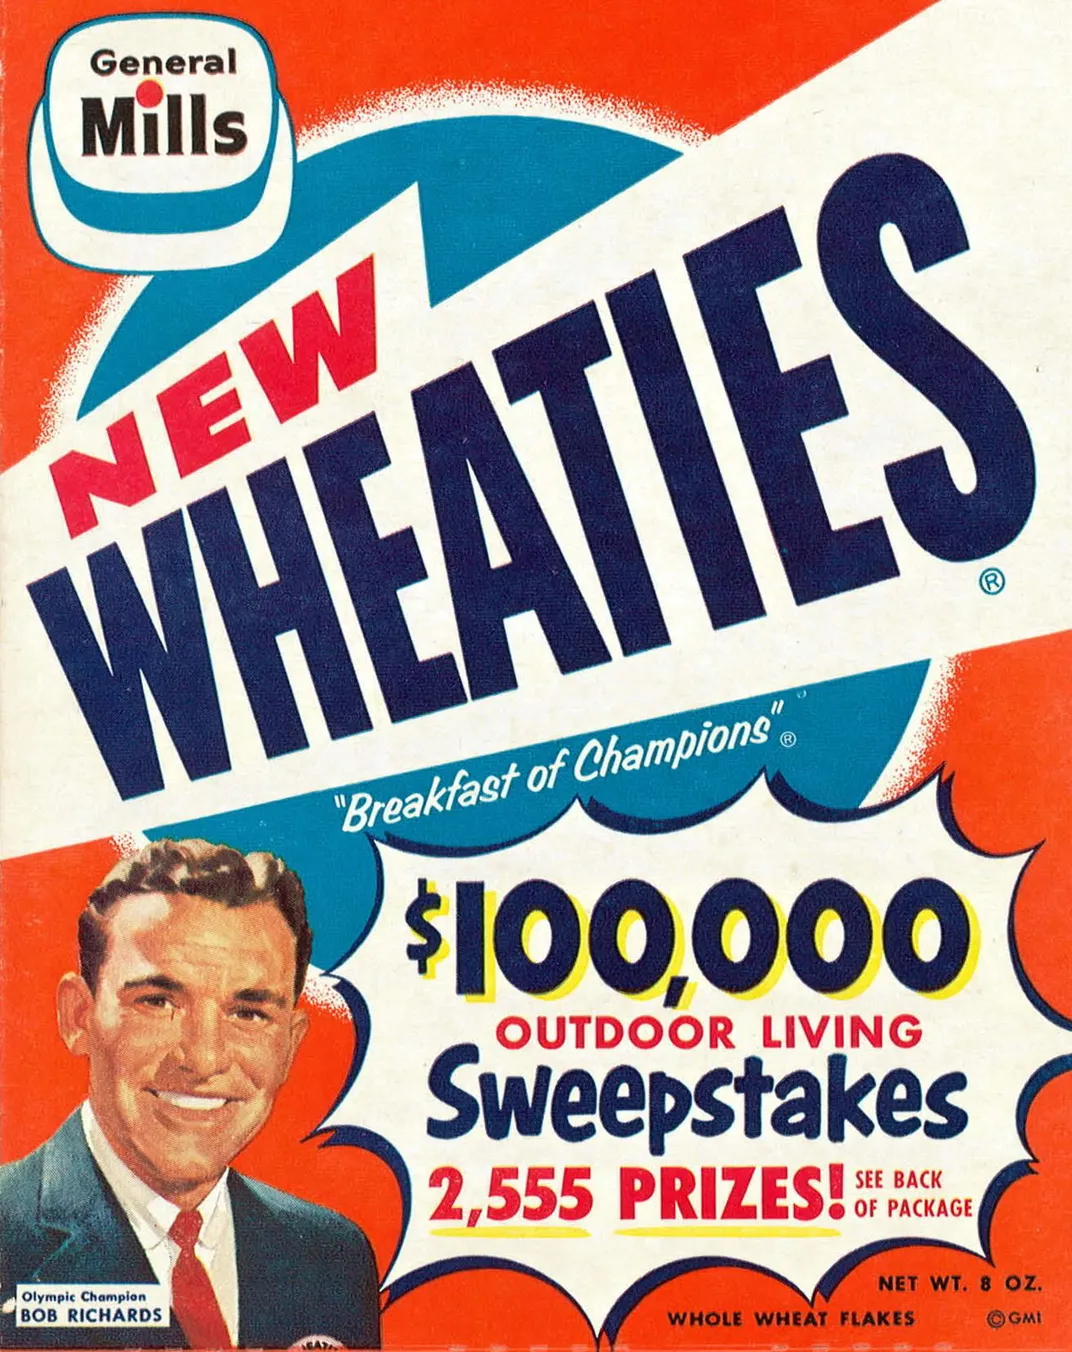 How Wheaties Became the 'Breakfast of Champions'